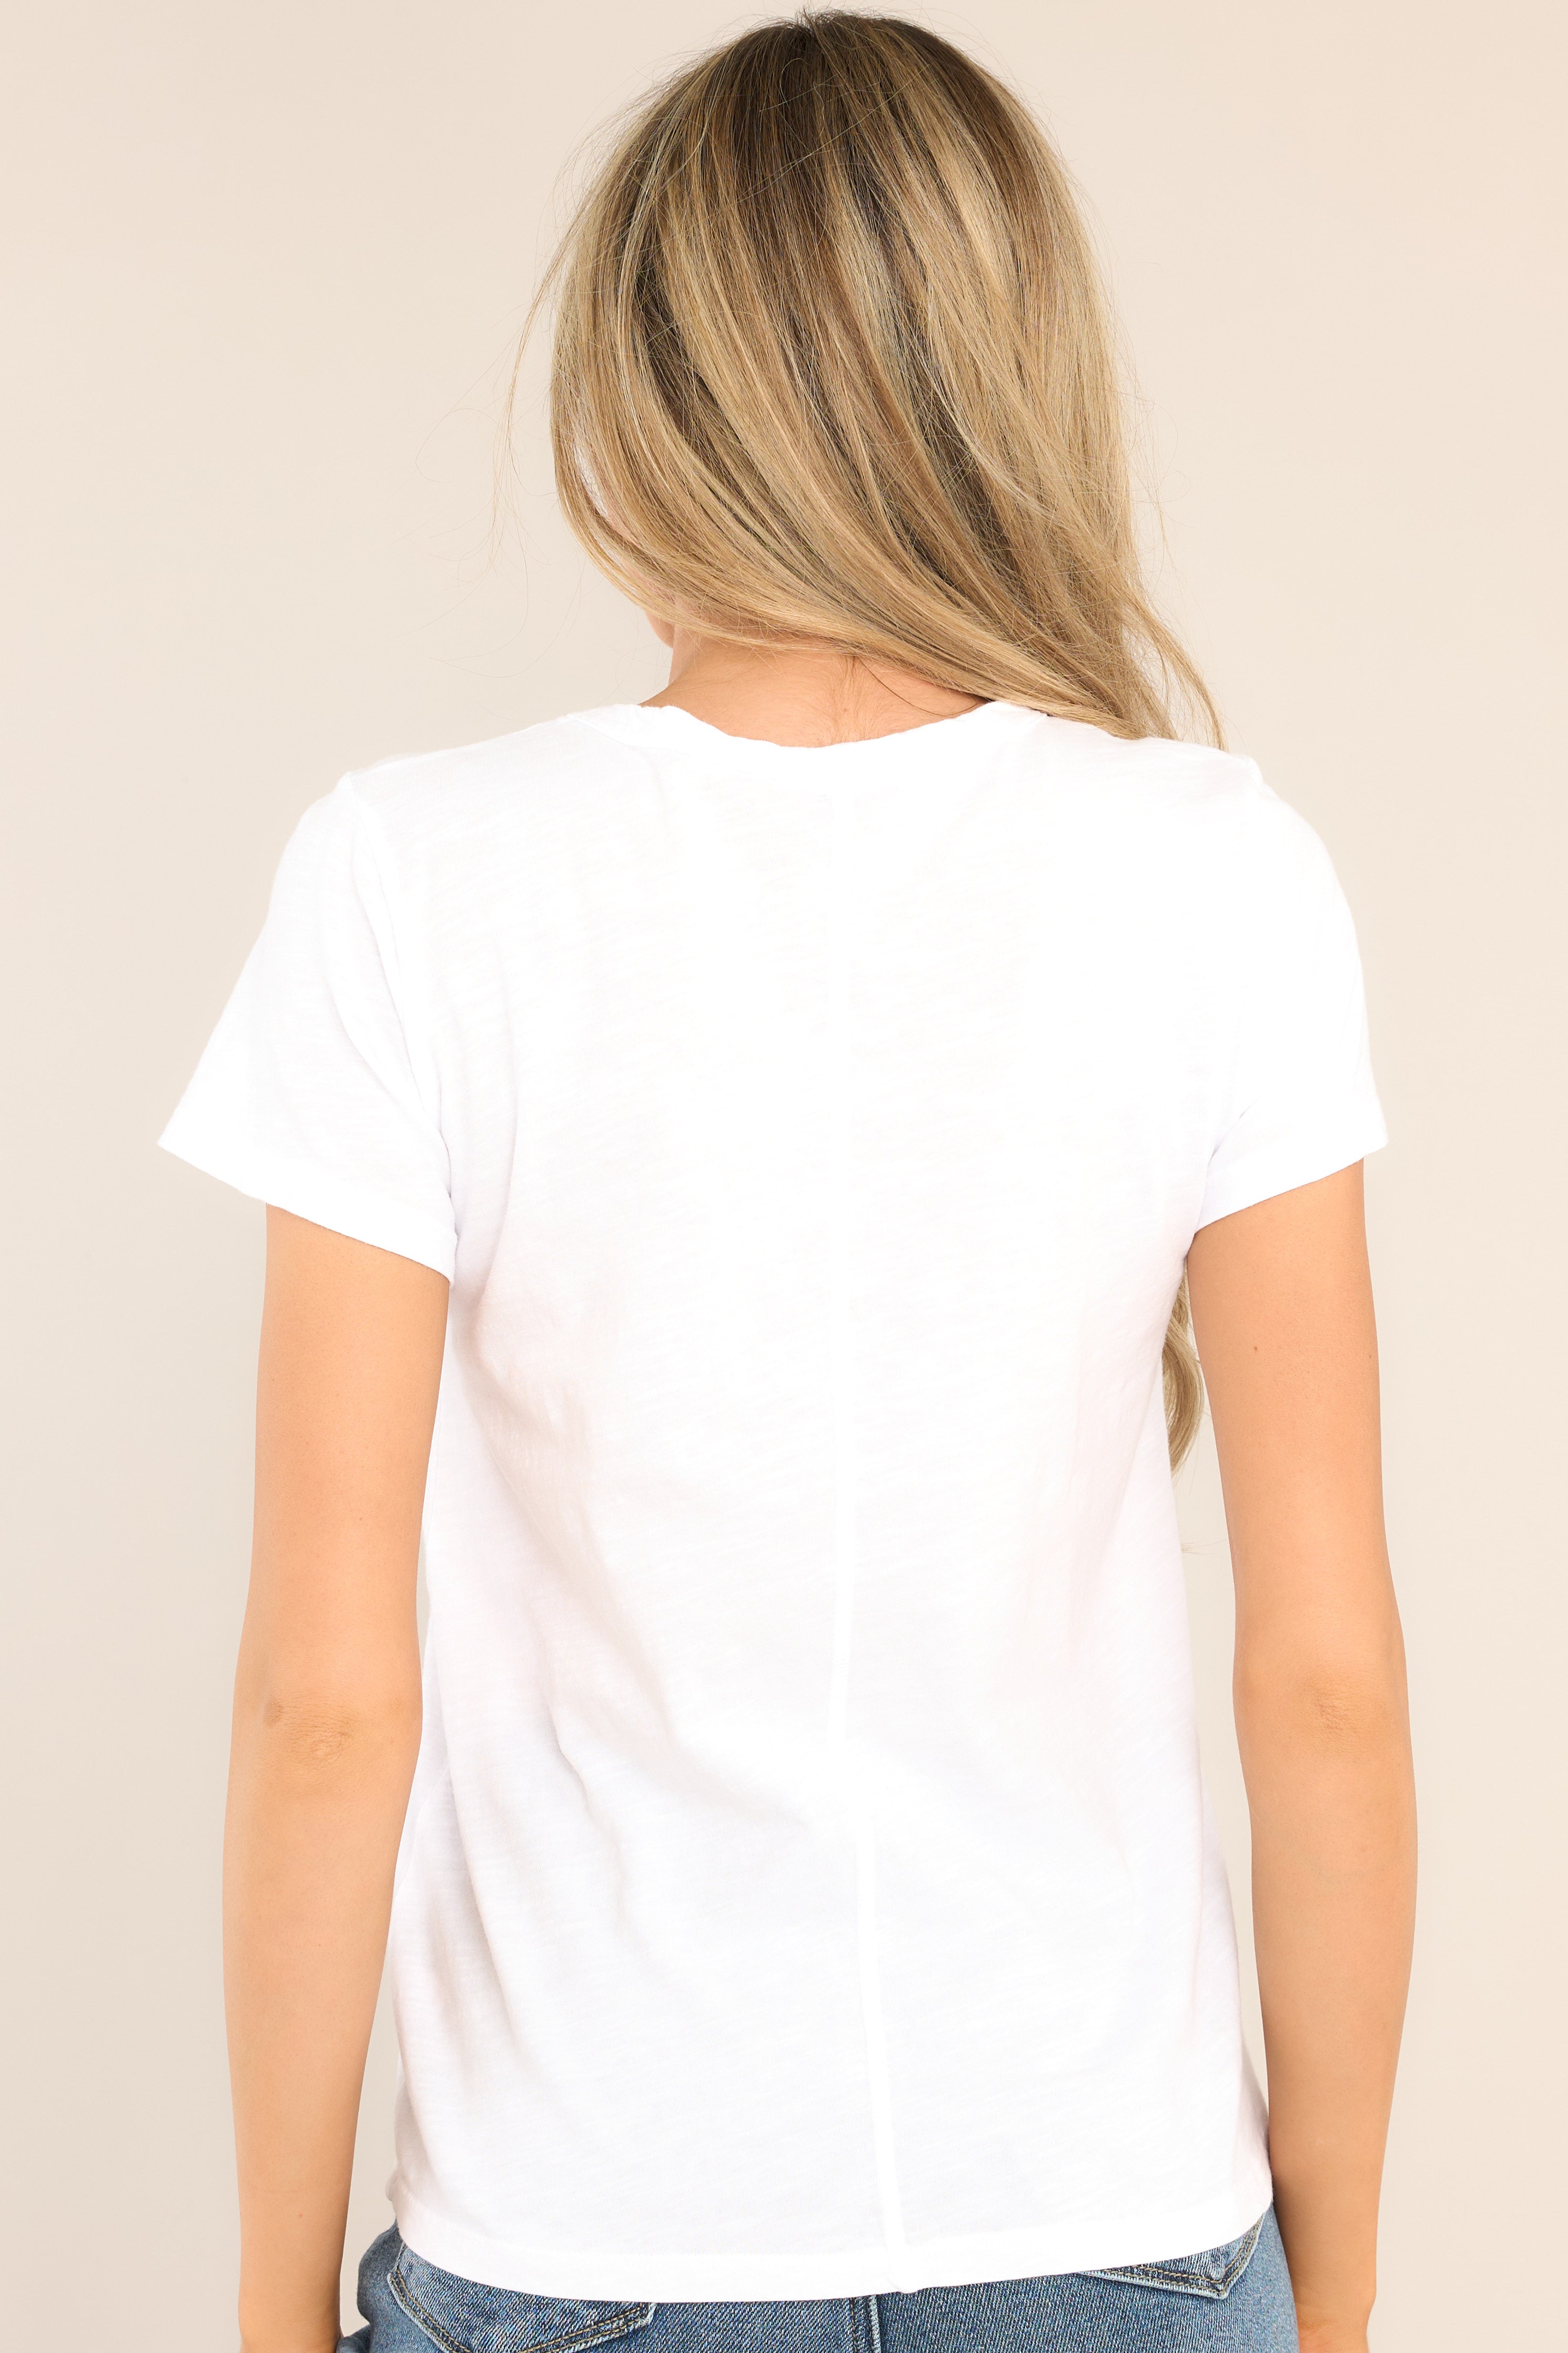 Back view of  this top that features a high crew neckline, lightweight material, an intentional exposed seam in the back, and short sleeves.